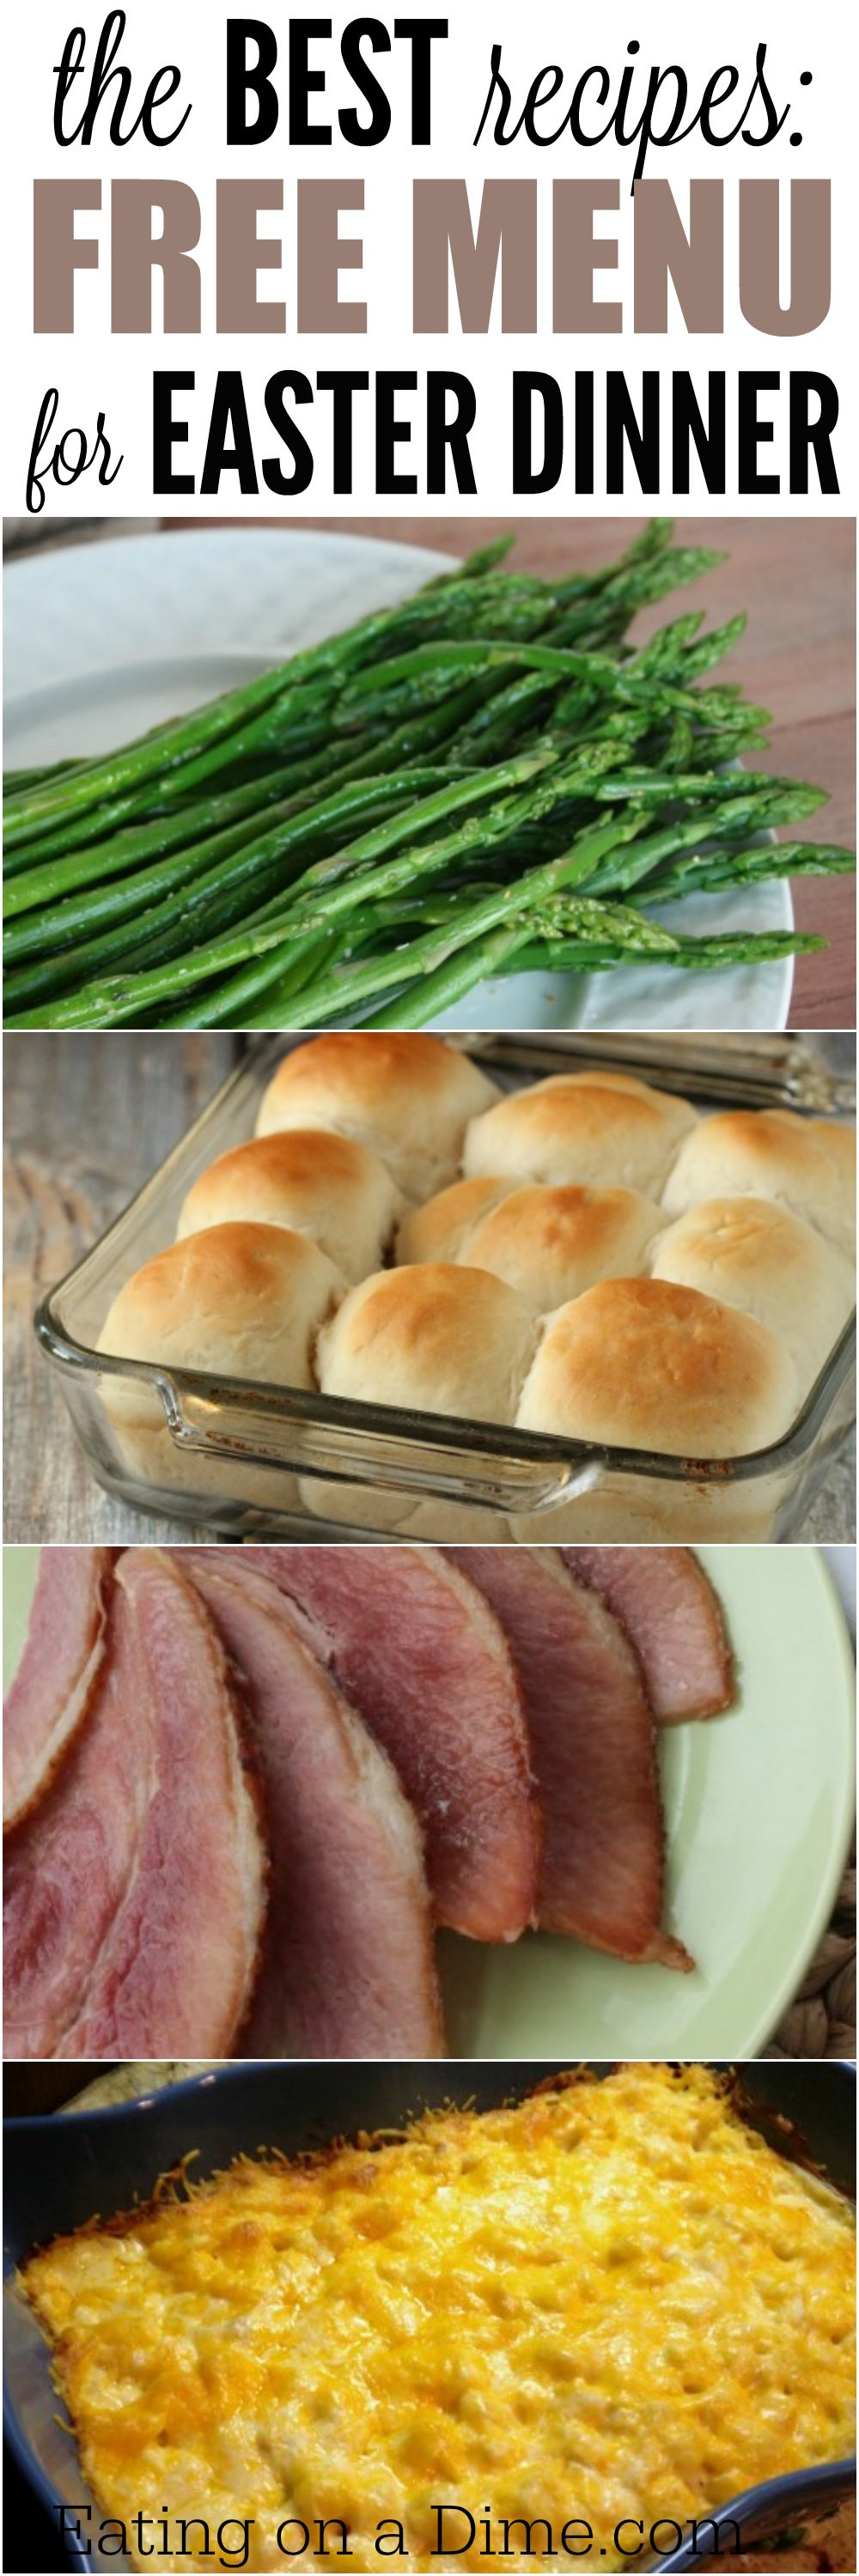 Perfect Easter Dinner Menu
 Easter Menu Ideas and Recipes The Best Easter Dinner recipes